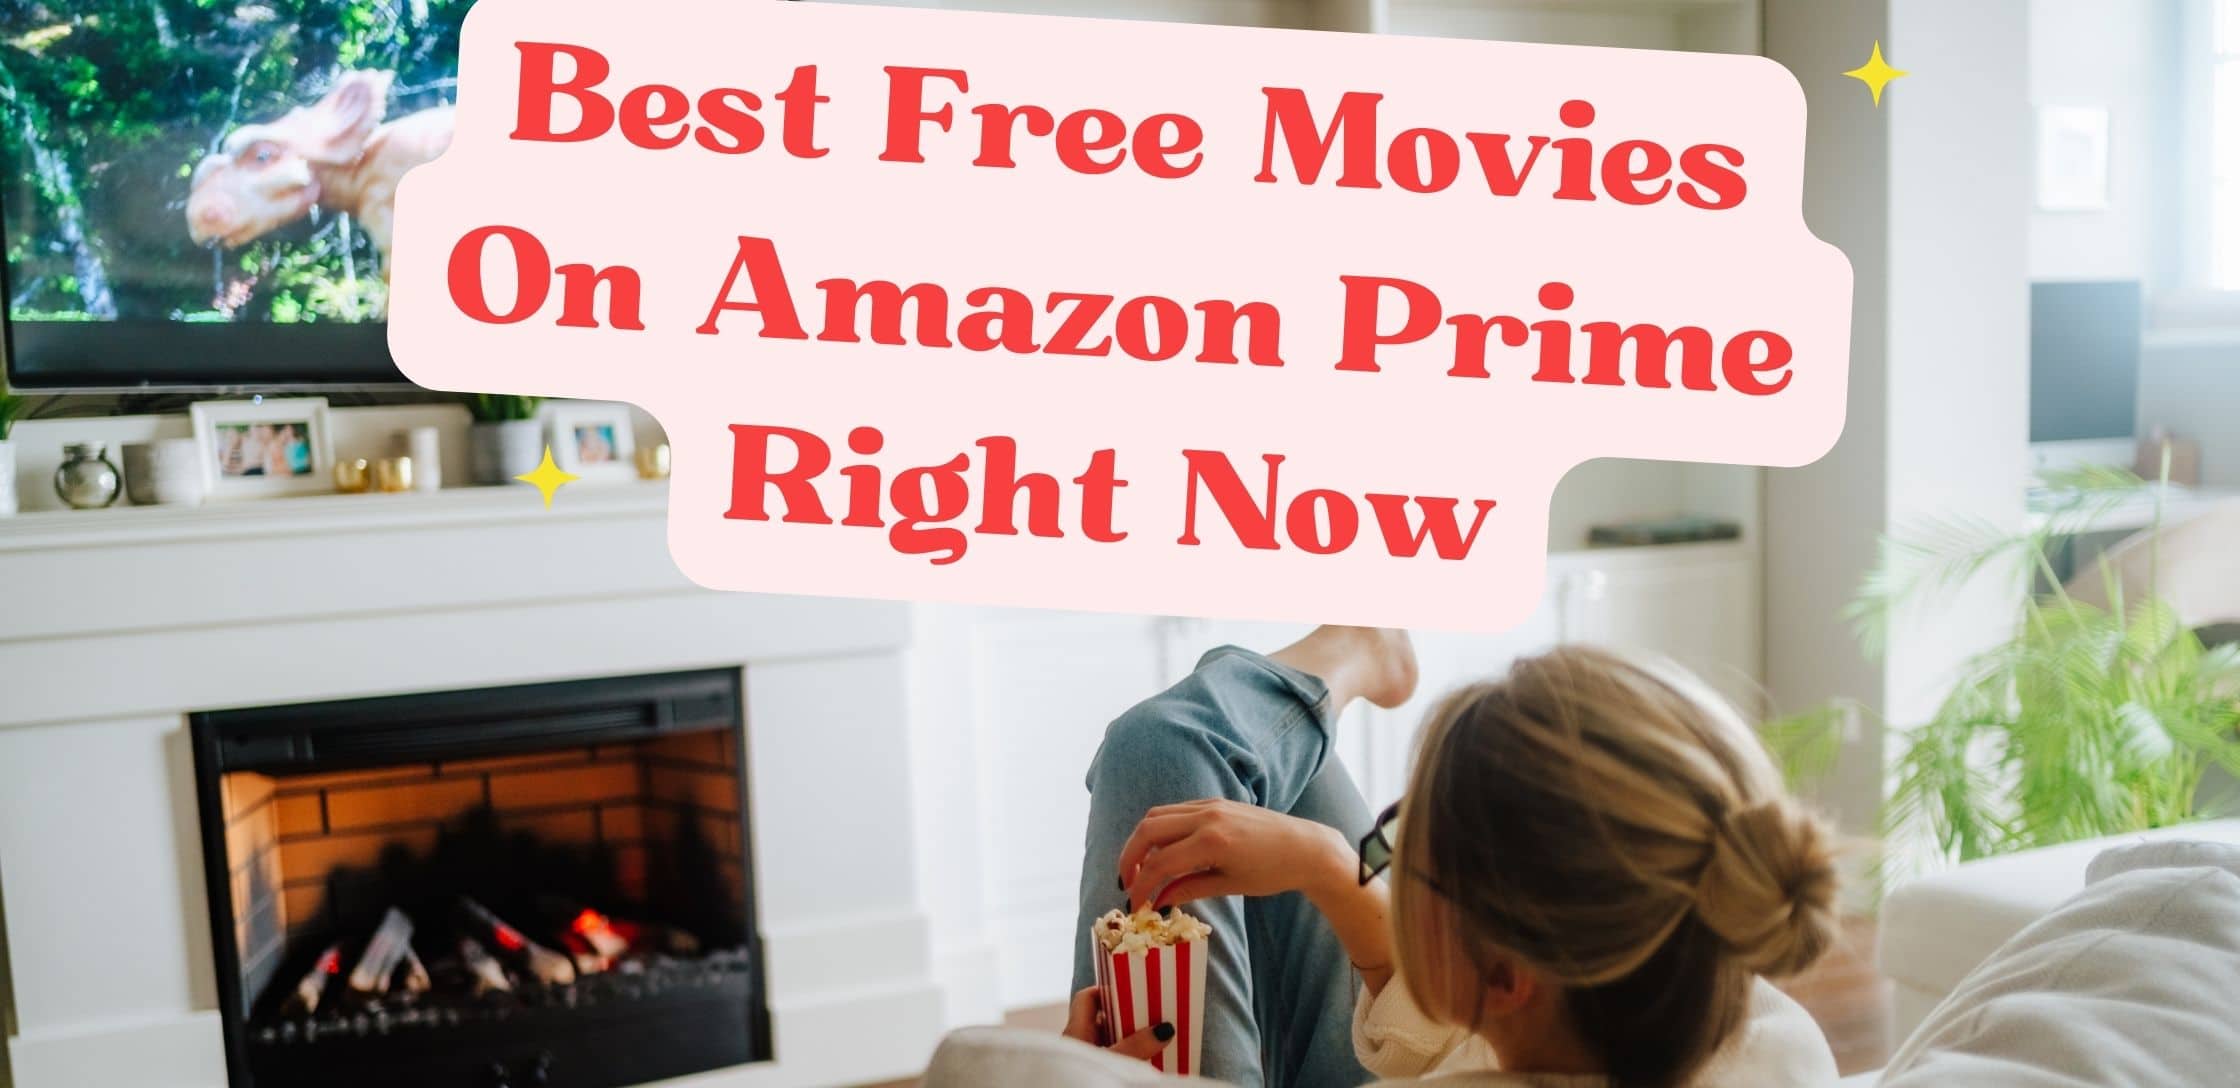 Best Free Movies On Amazon Prime Right Now